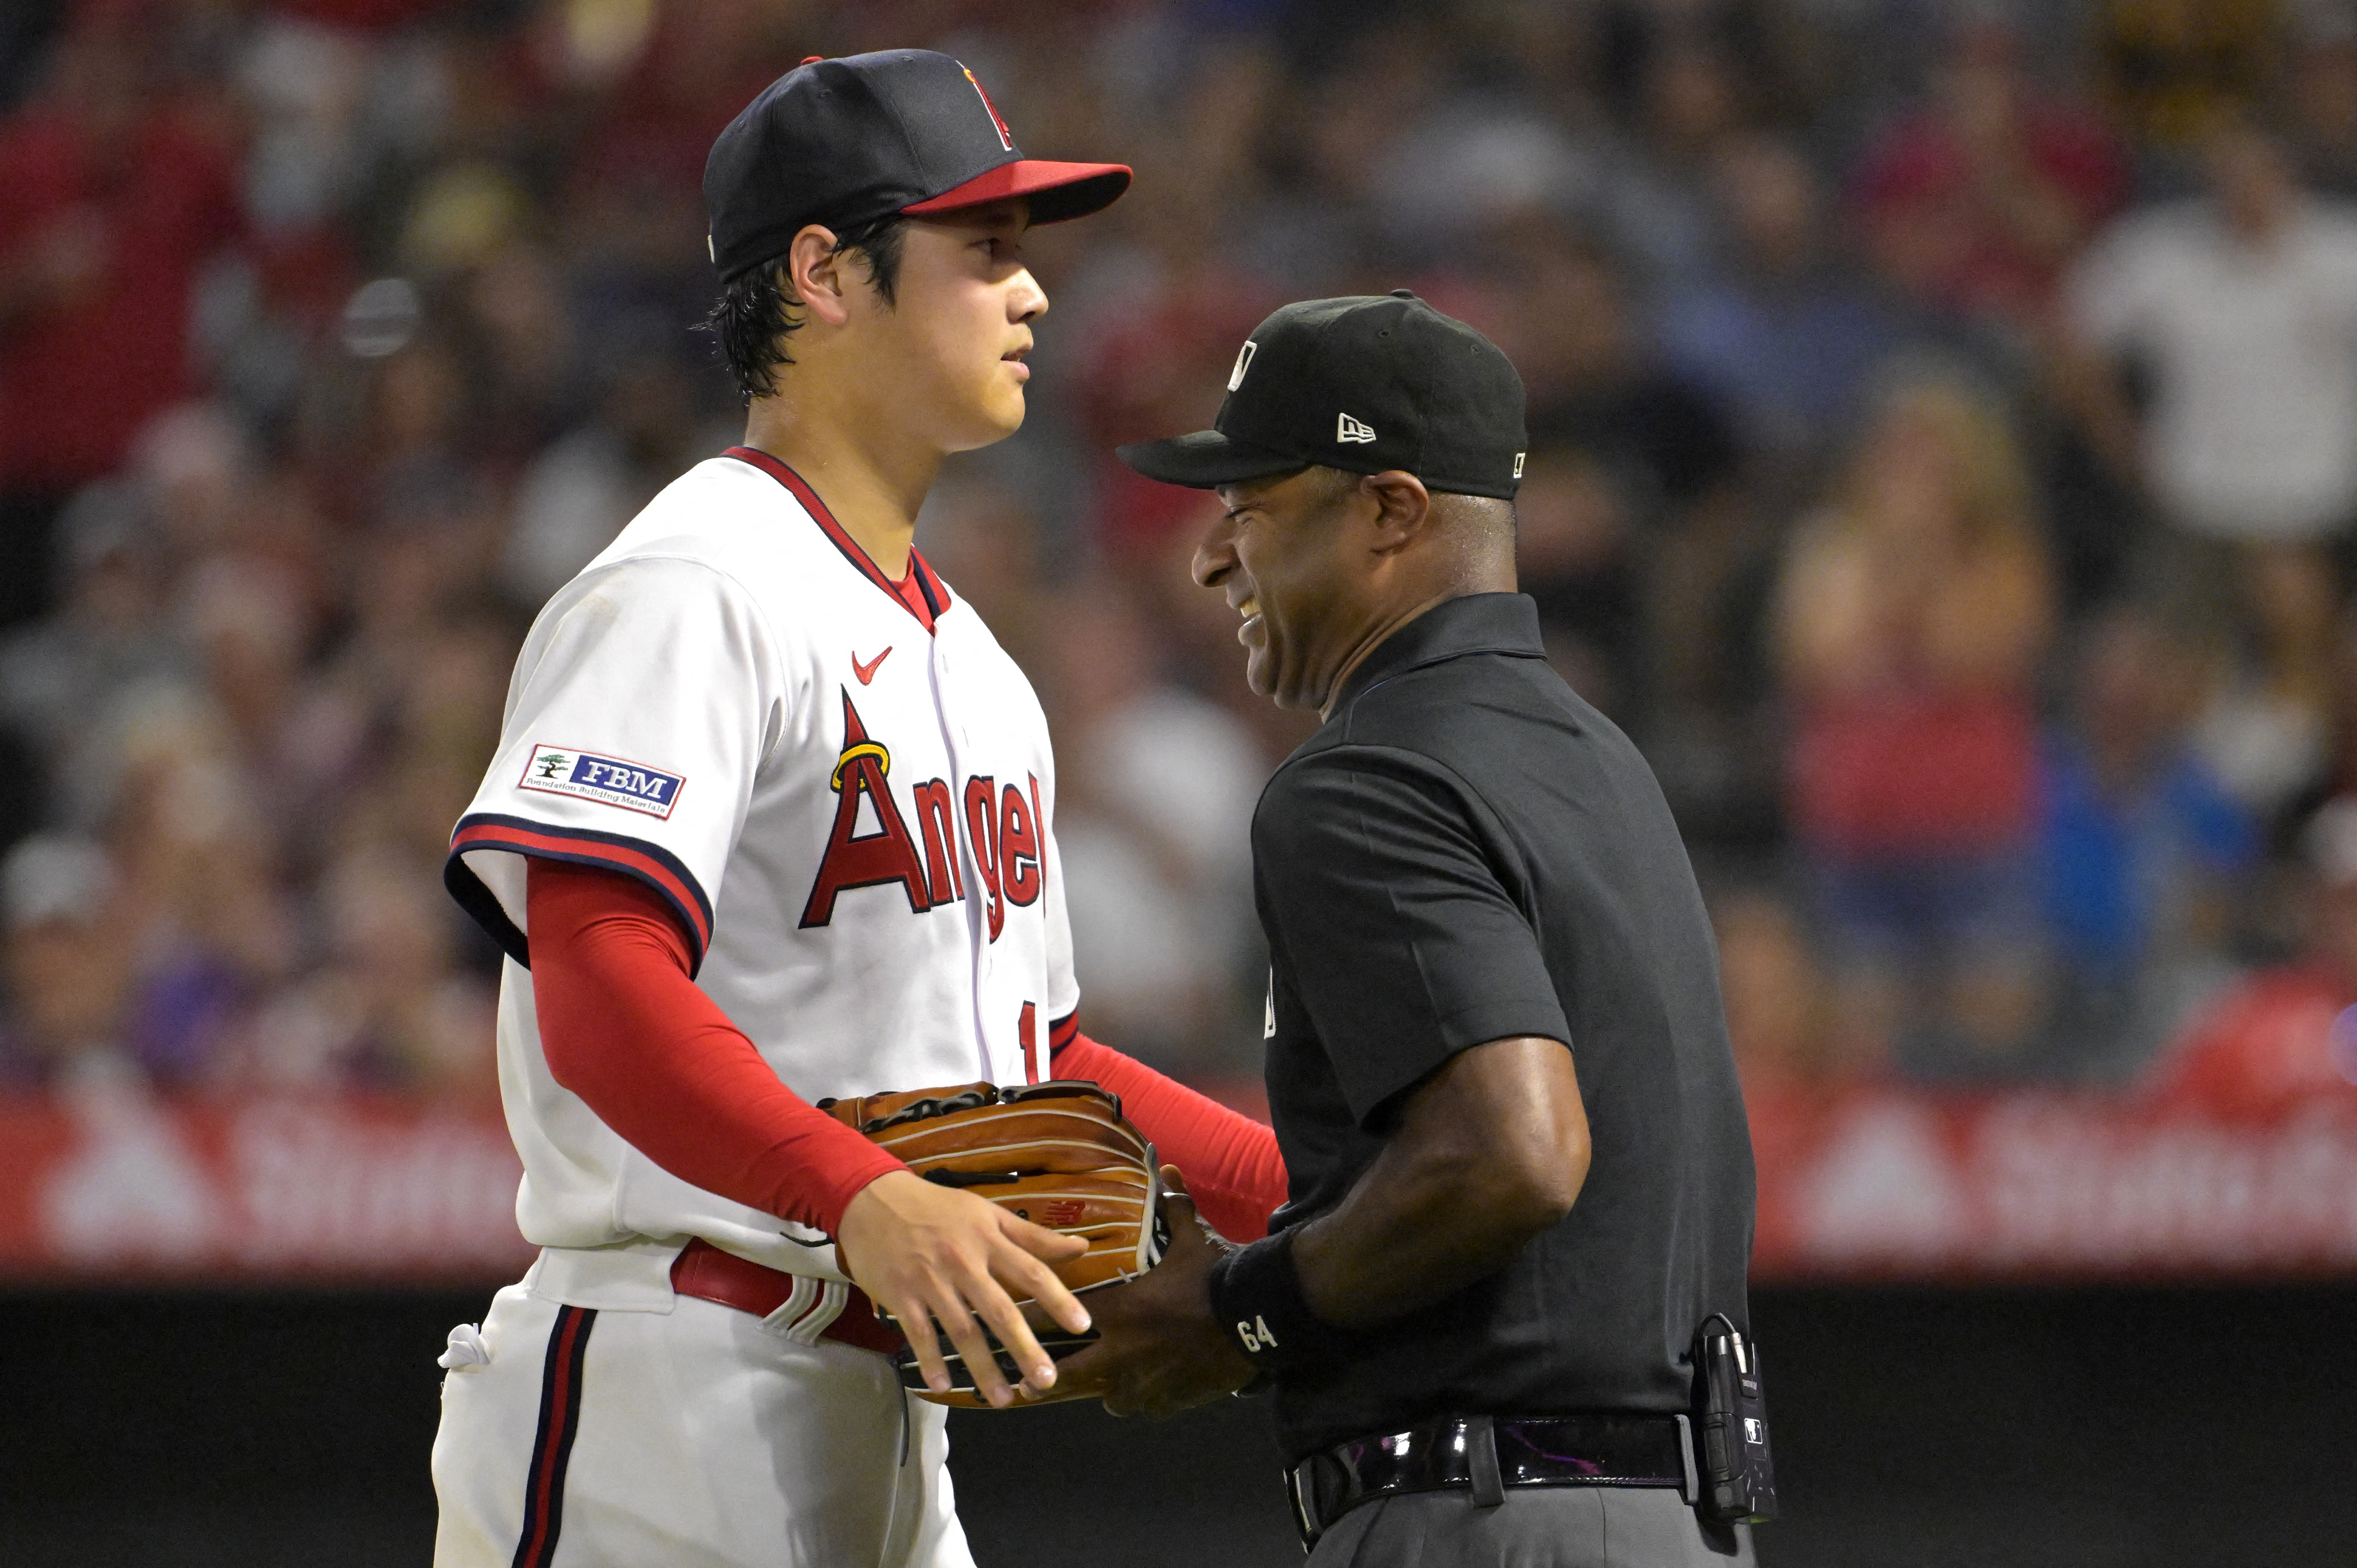 Pittsburgh Pirates interest in Shohei Ohtani could impact top